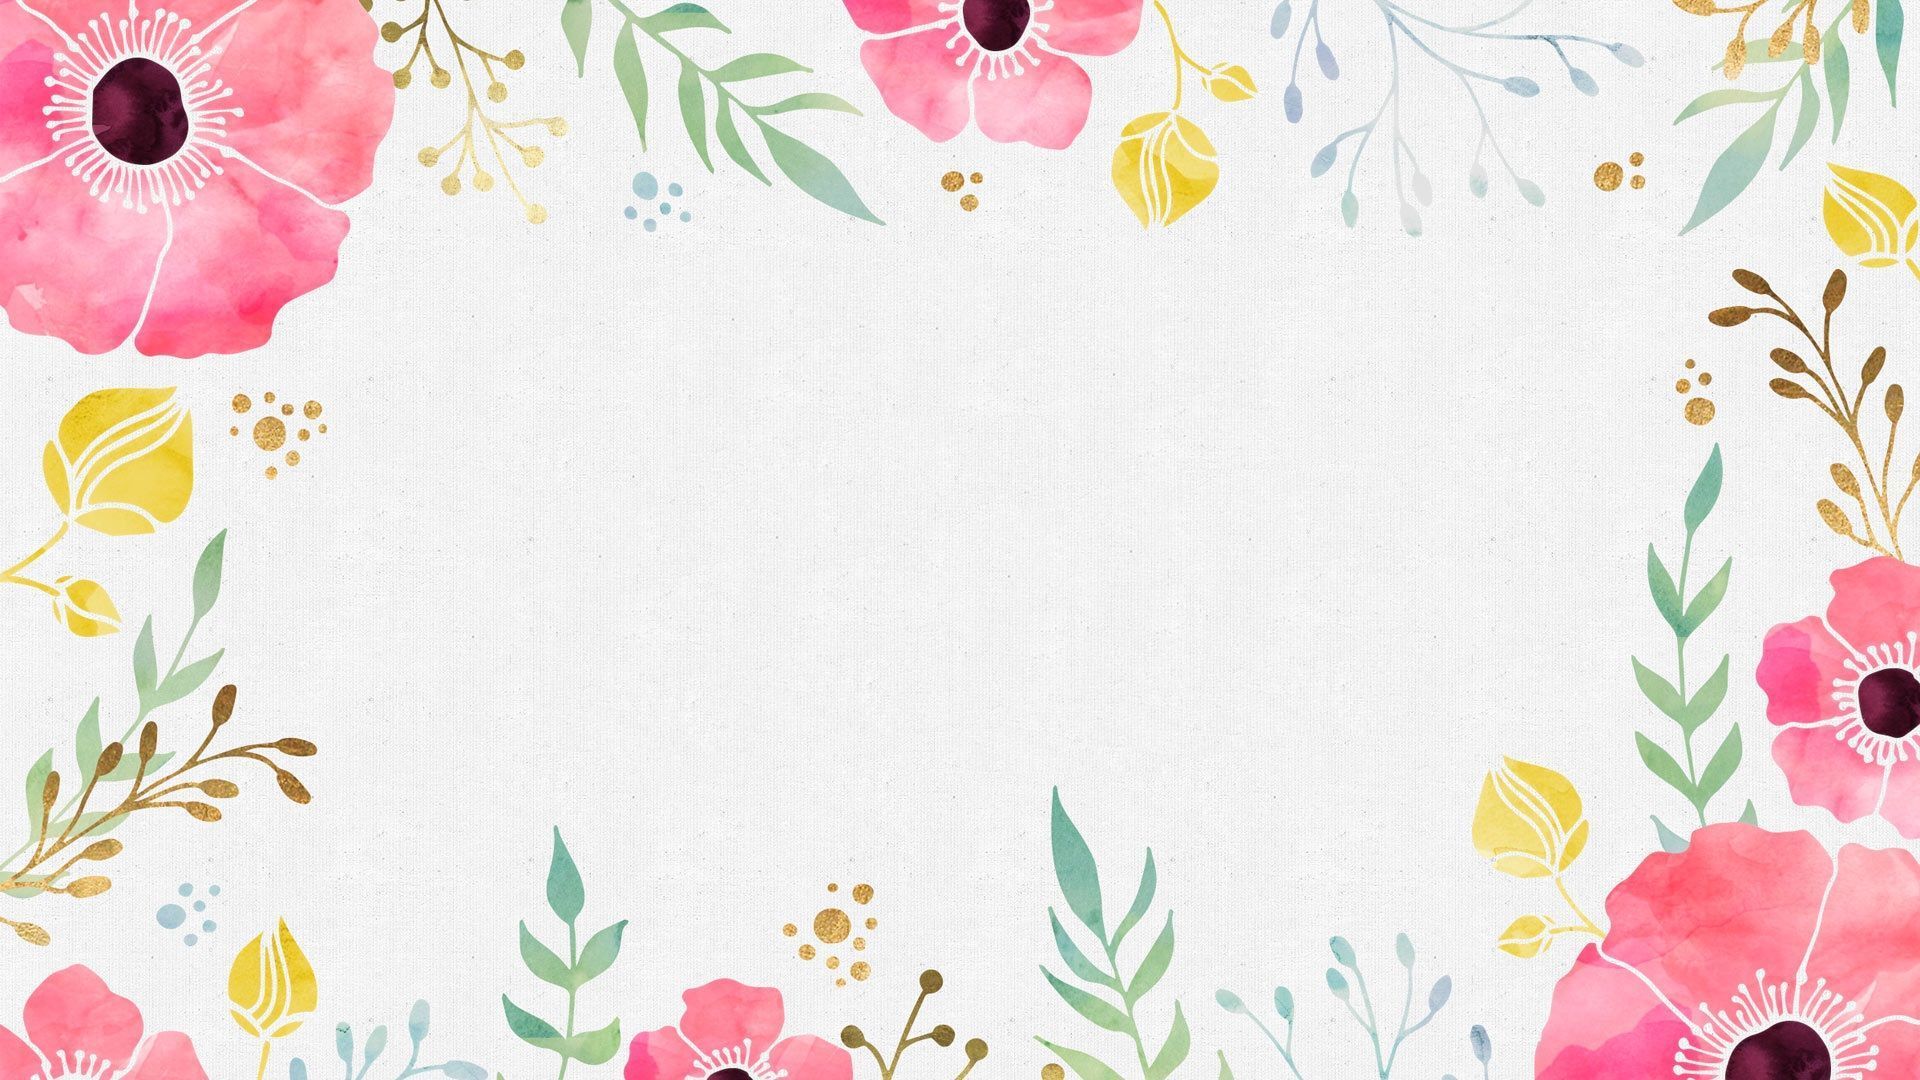 Watercolor Floral Wallpapers.